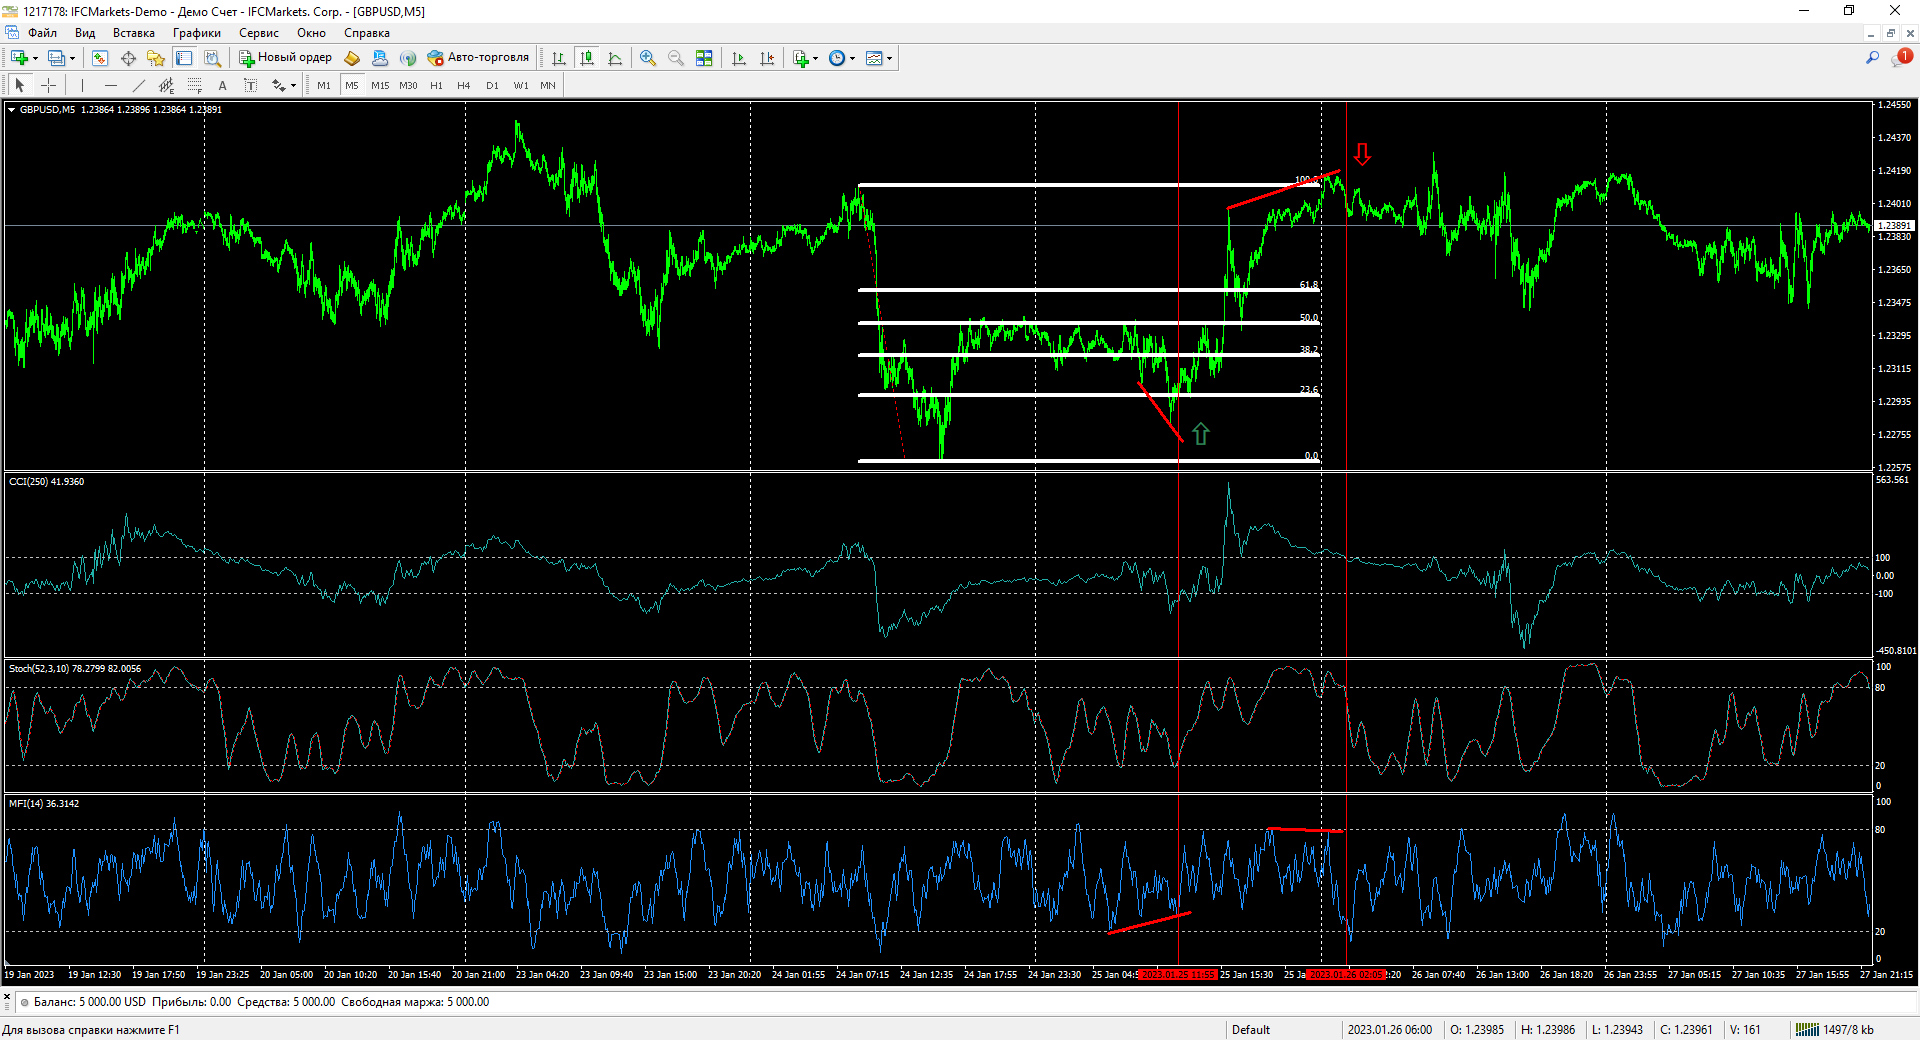 gbpusd-m5-ifcmarkets-corp-2.png